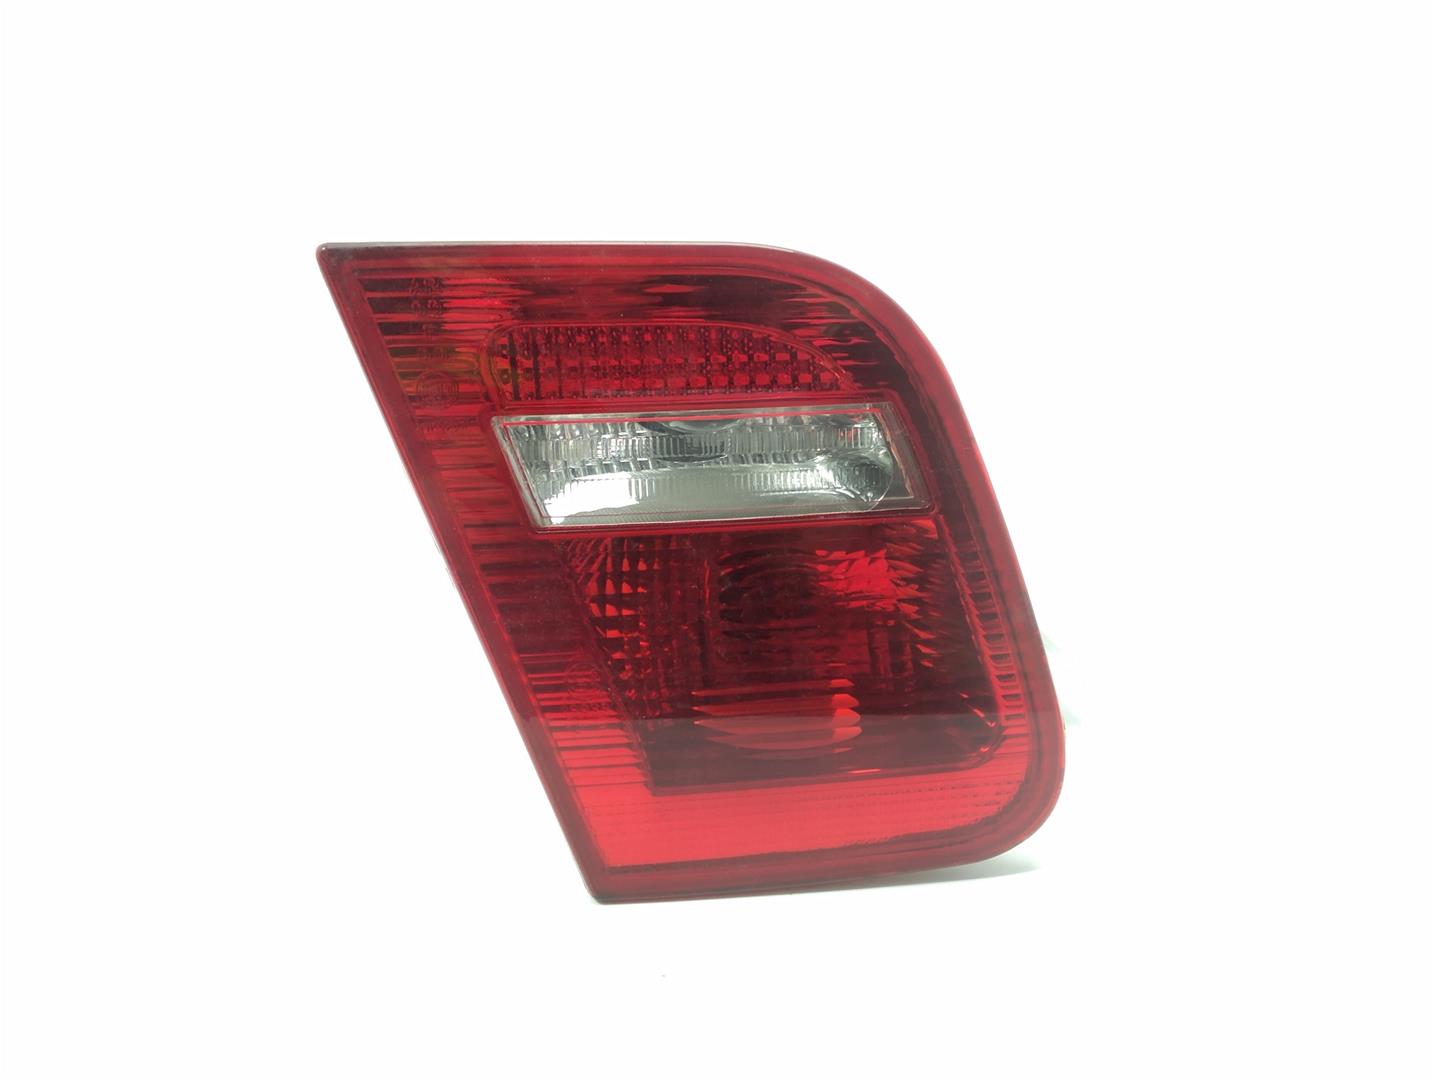 BMW 3 Series E46 (1997-2006) Rear Left Taillight 6920705, 6920705, 6920705 24512033